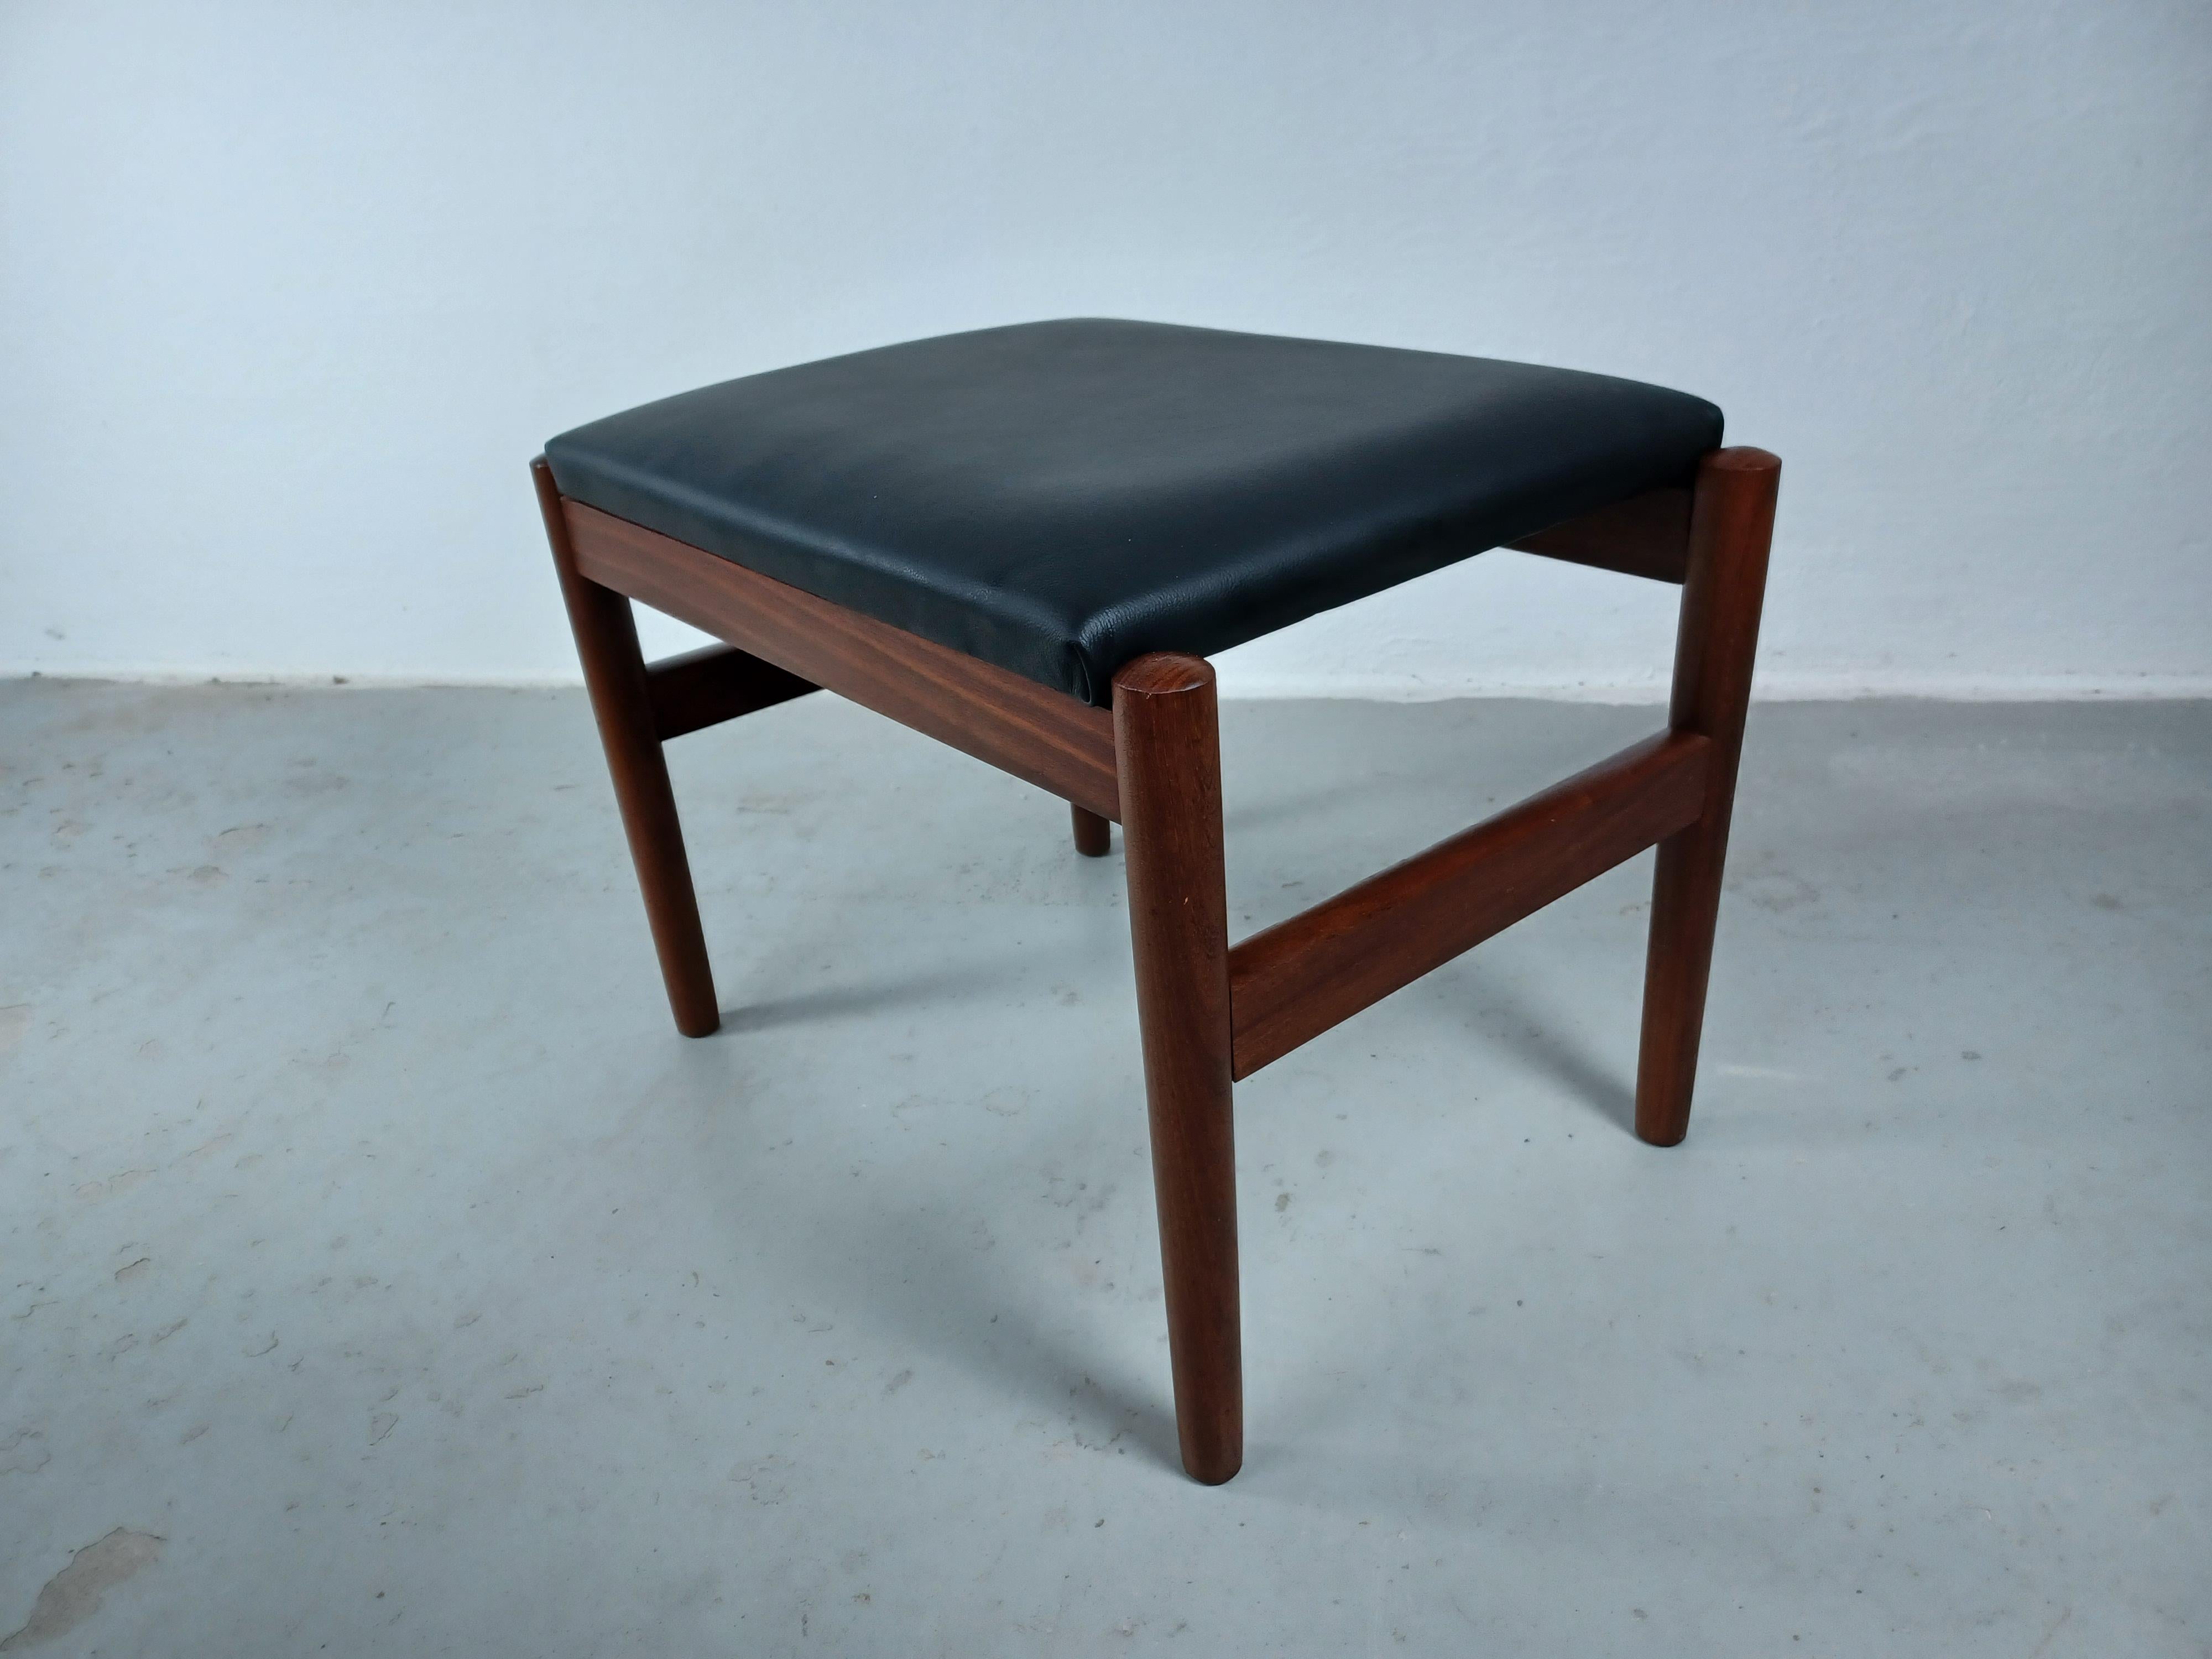 1960s Restored Danish teak footstool reupholstered in black leather.

Fully restored Danish footstool in minimalistic yet advanced Scandinavian modern design.

The footstool has been fully restored by our cabinetmaker and reupholstered in black